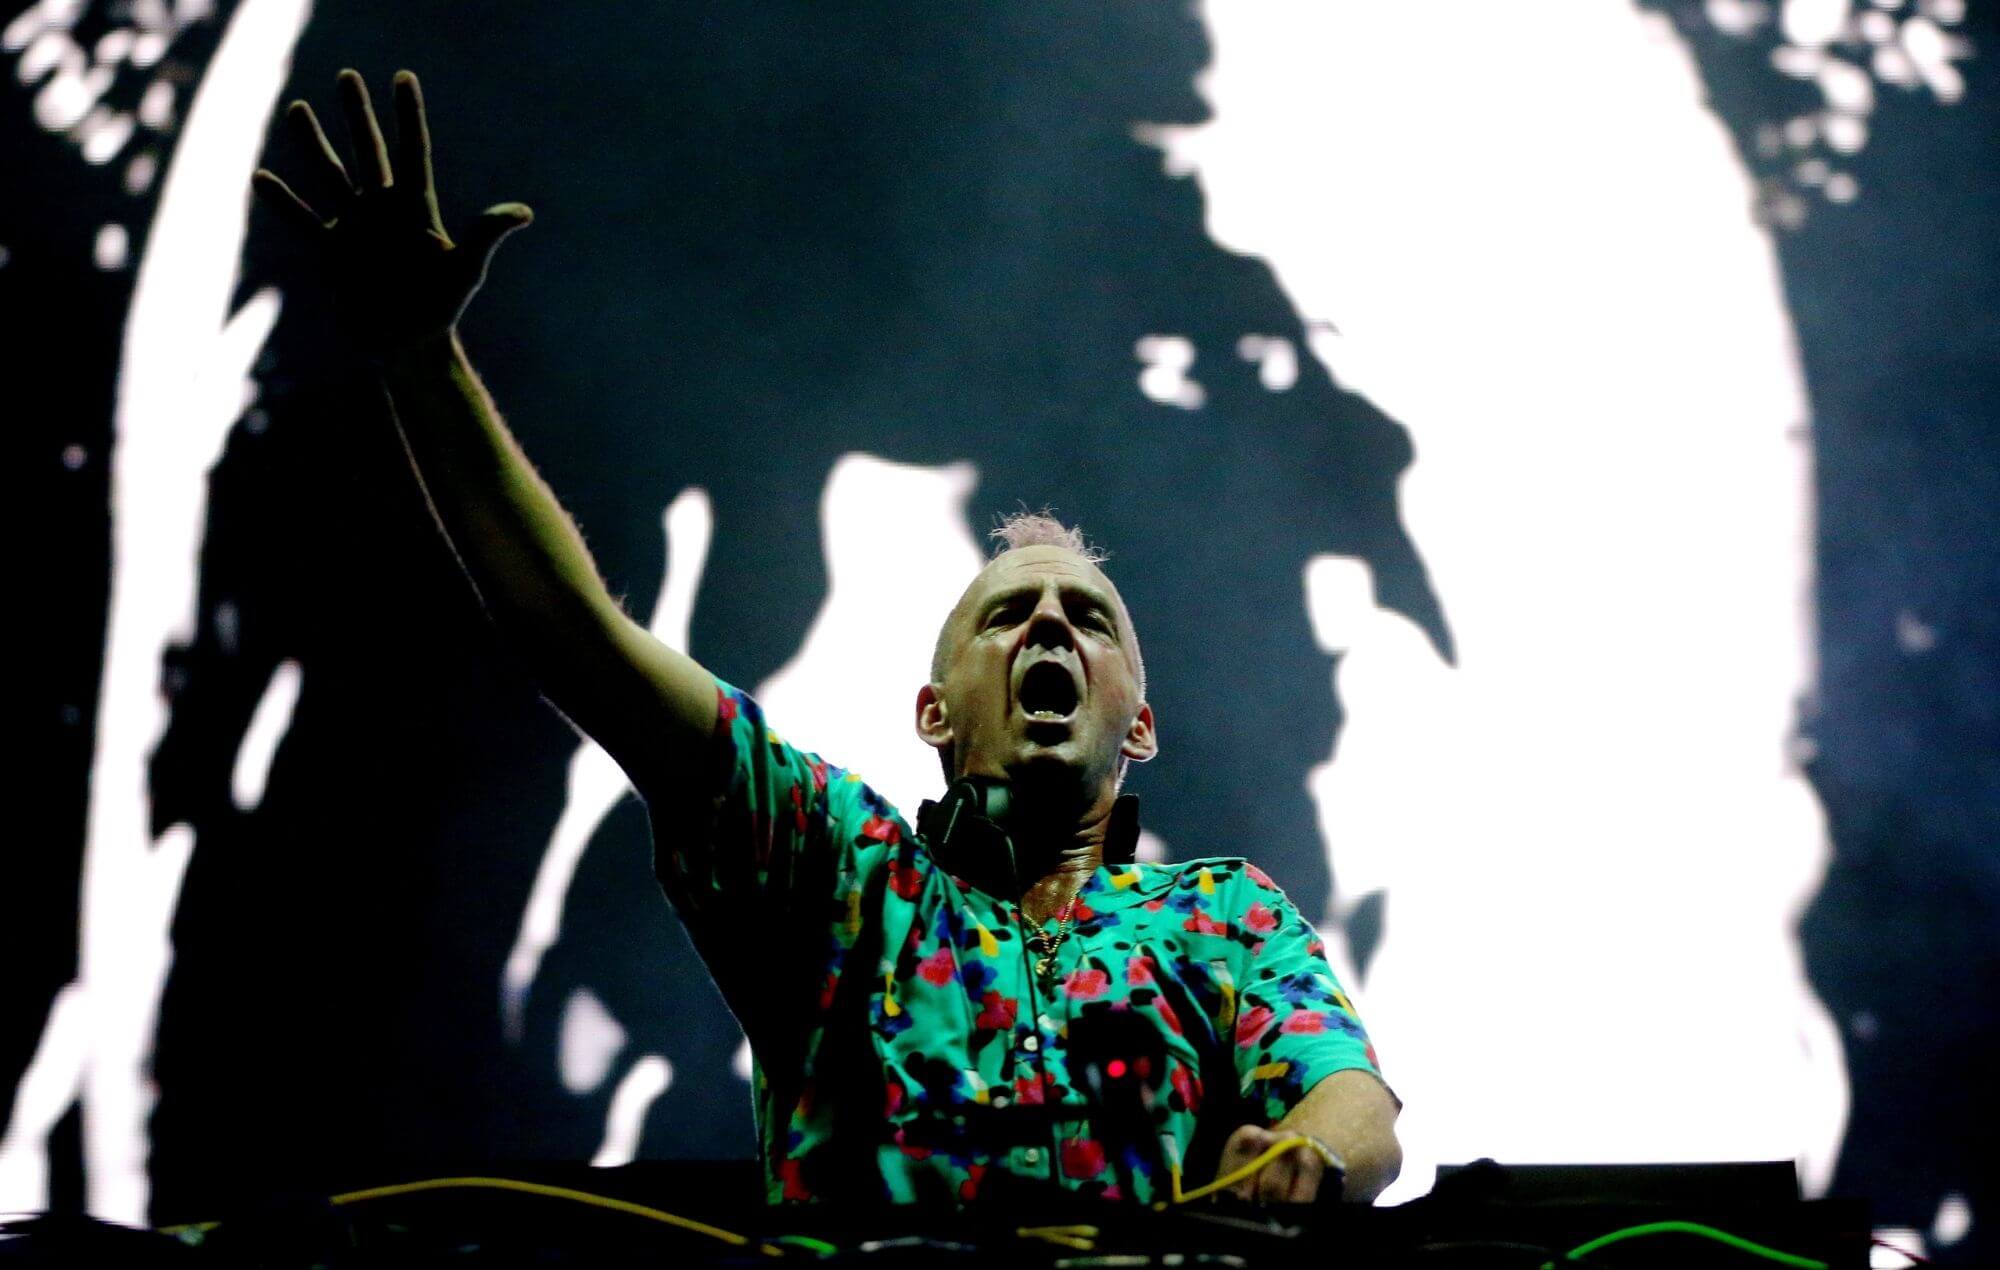 Fatboy Slim COVID pilot The First Dance 6,000 people party